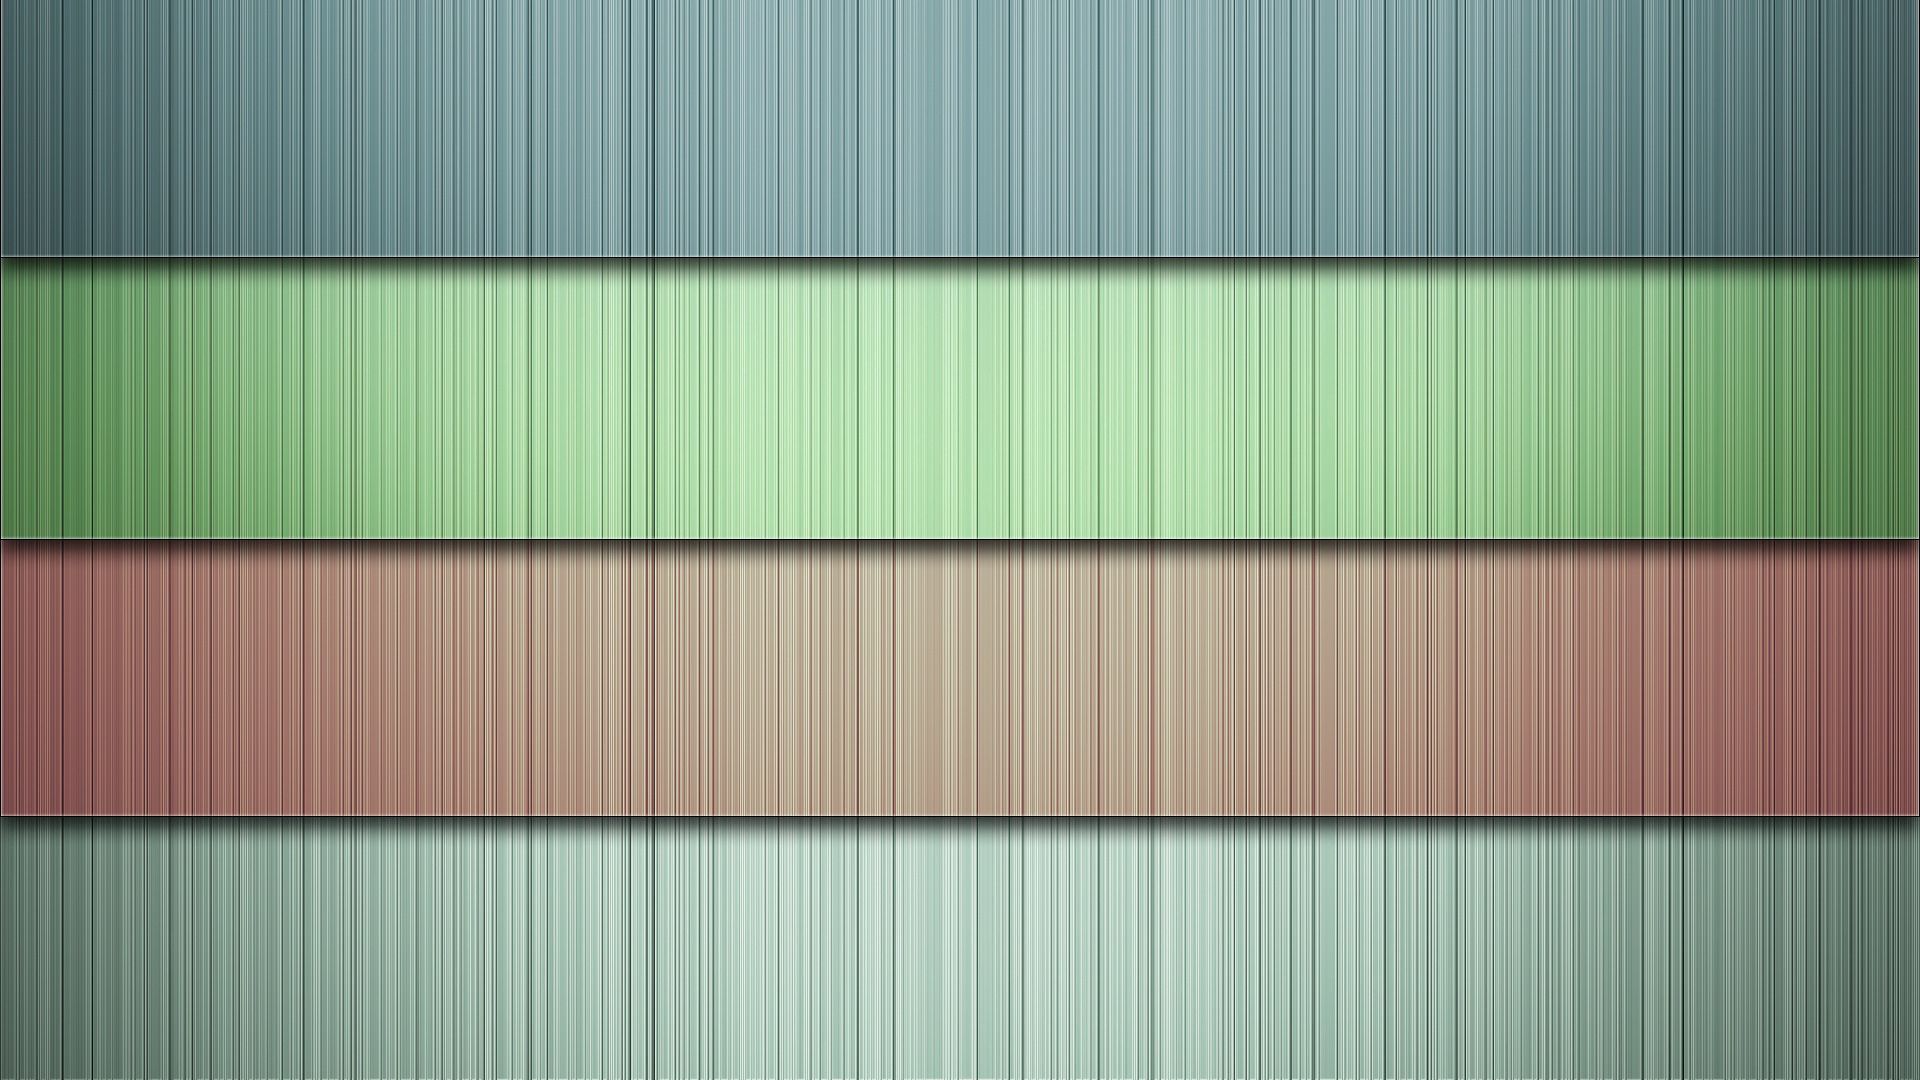 New Lock Screen Wallpapers background, textures, texture, lines, stripes, streaks